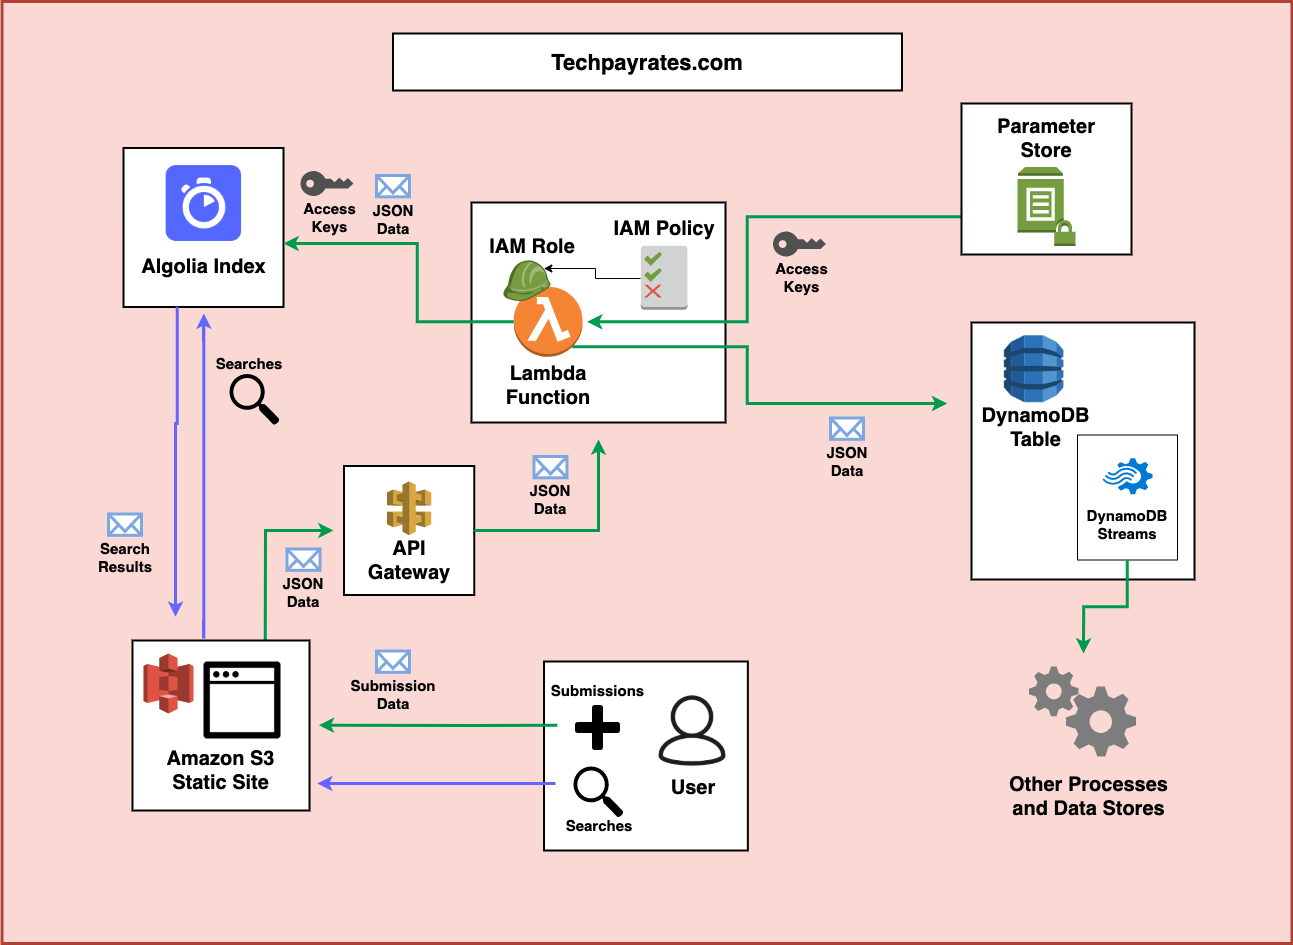 A visual demonstrating the use of several AWS Services and Algolia being used to make the website. The contents of the diagram are described below.